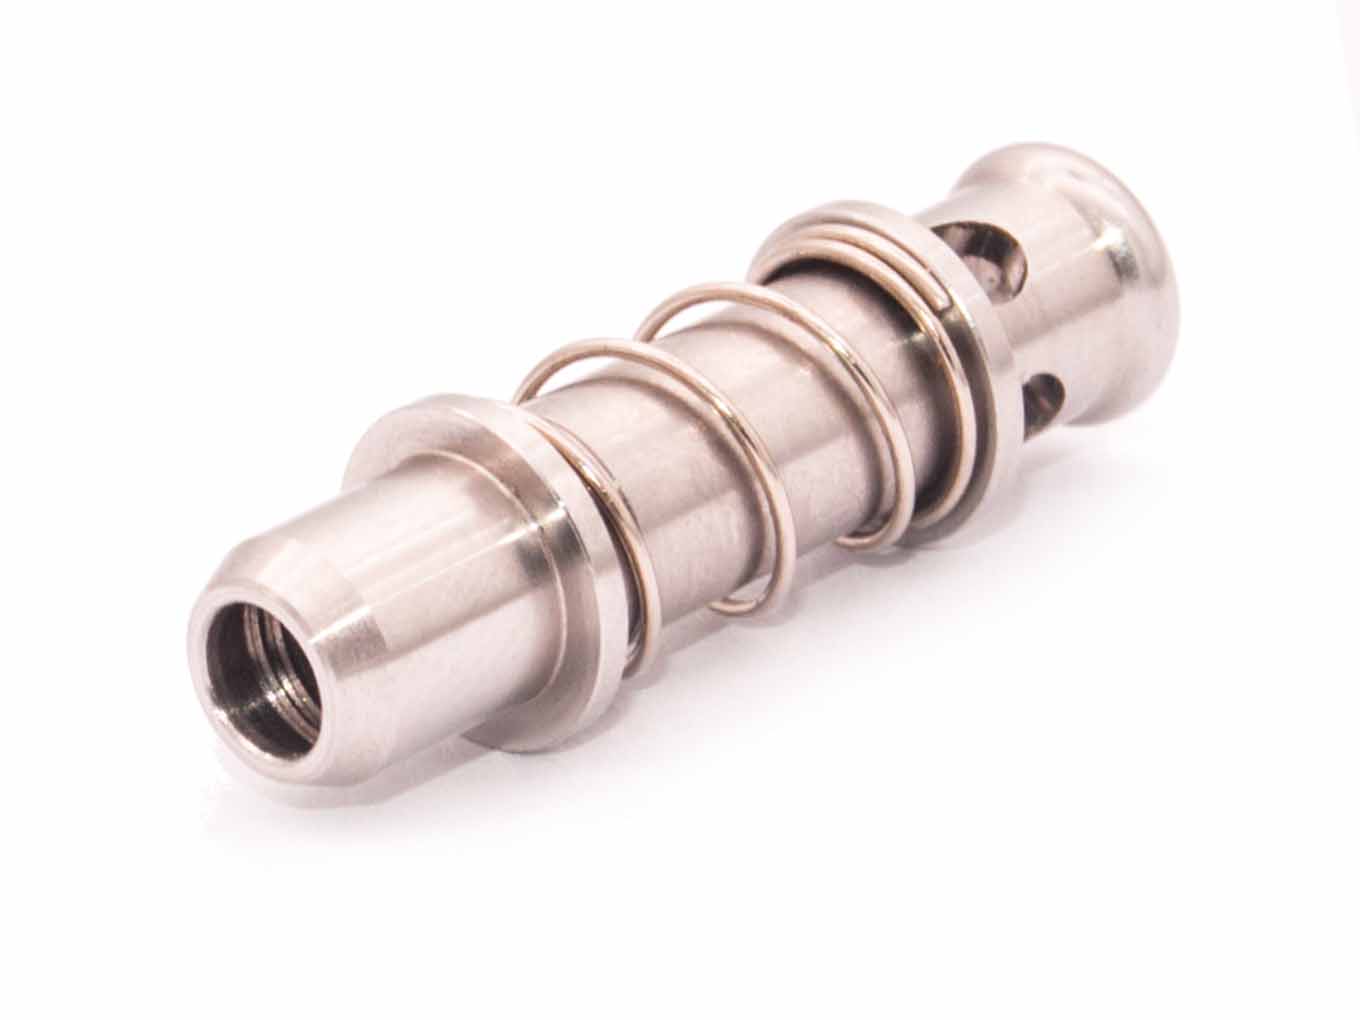 AOLS Air Nozzle For AEG PTW, Stainless Steel, CNC machined